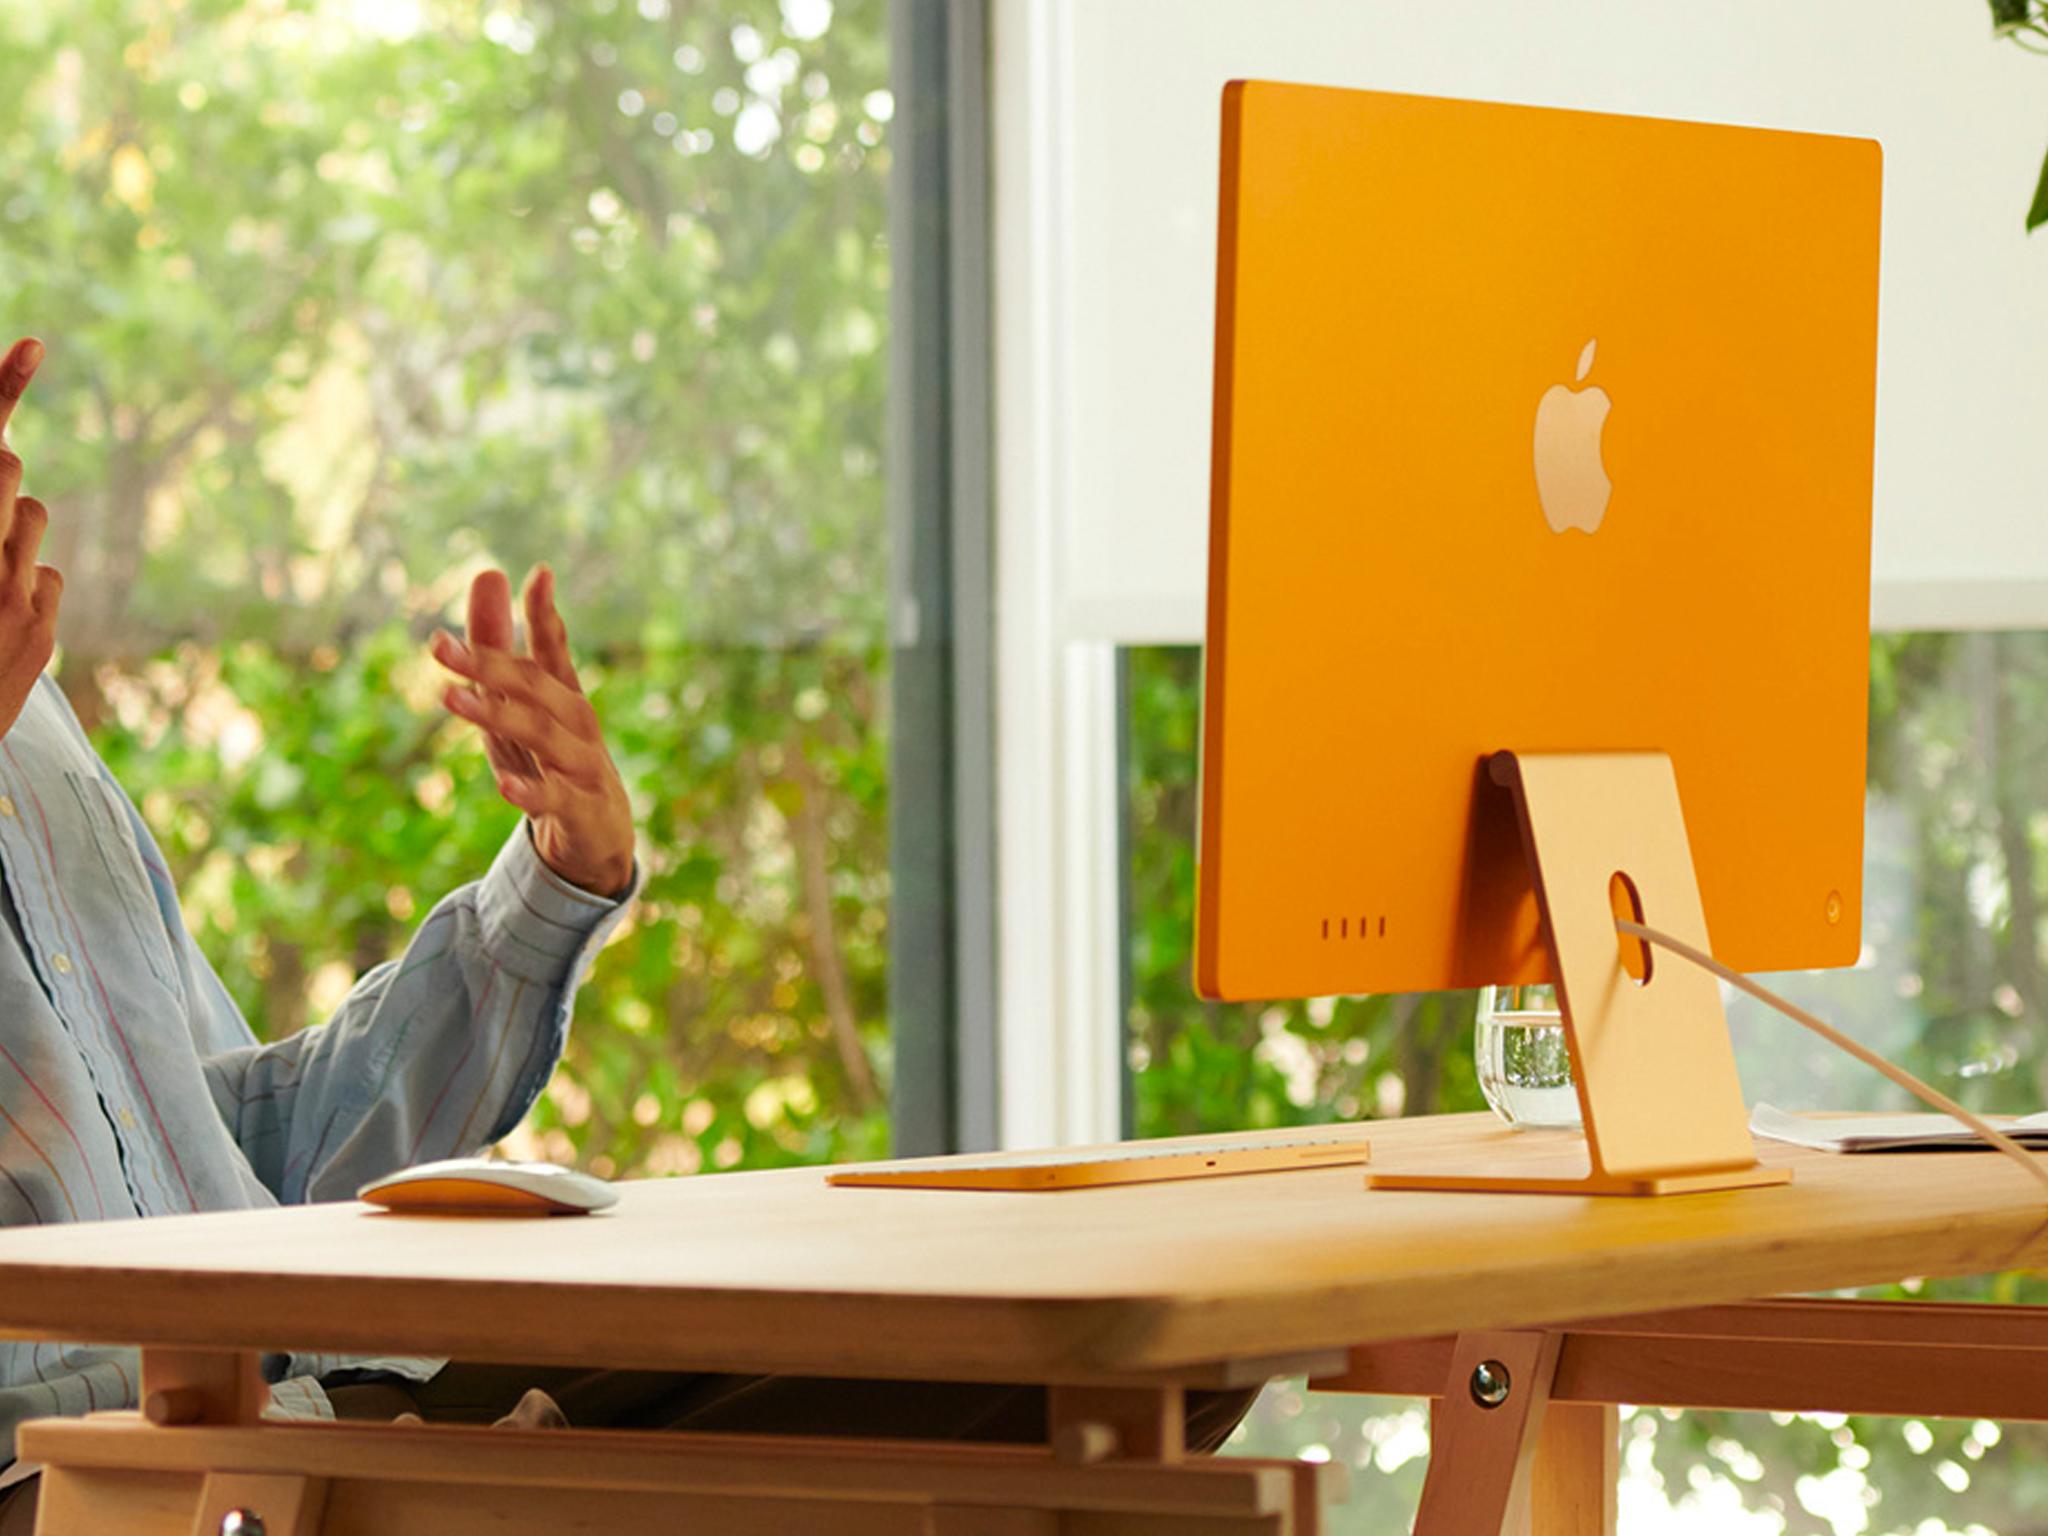 Best iMac 2021 deals: Where to buy Apple's 24-inch M1 iMac ...